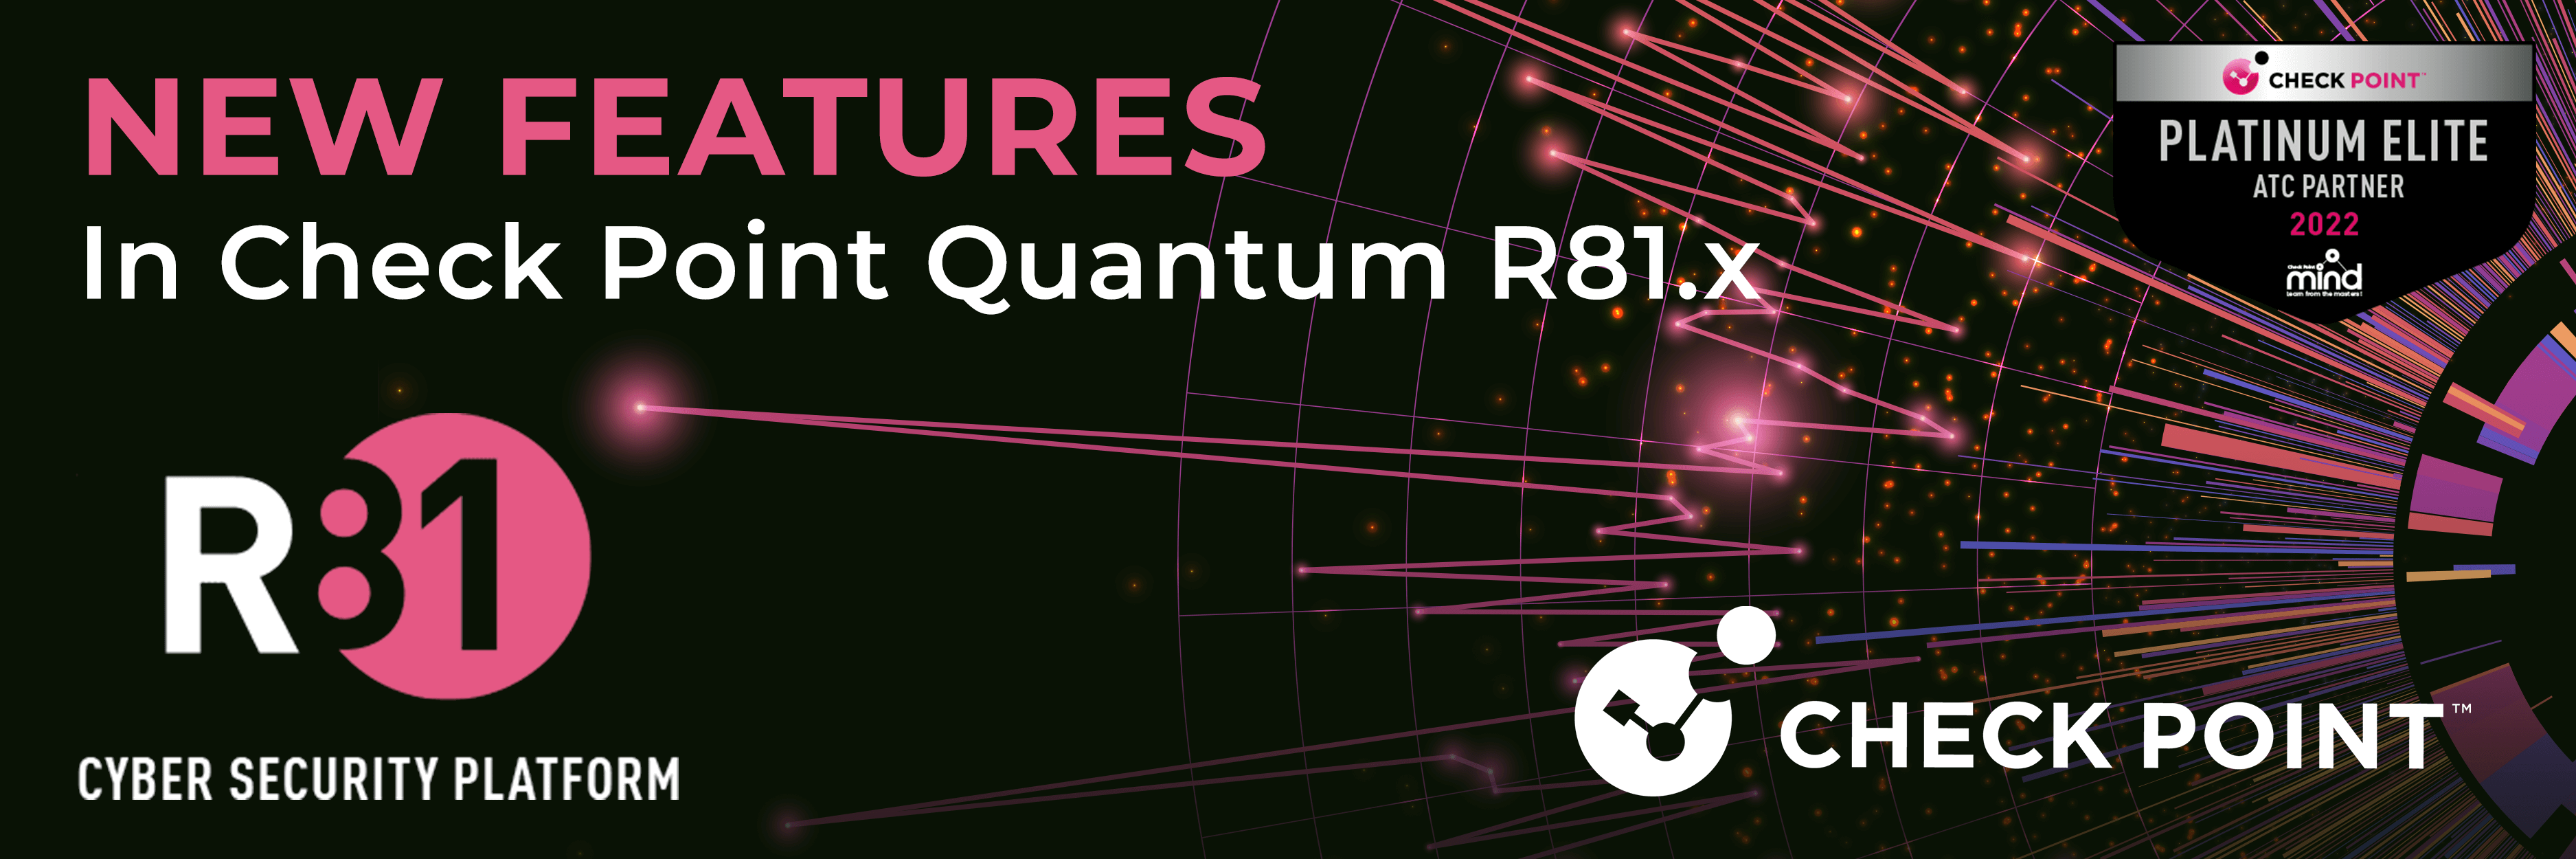 New Features in Check Point Quantum R81x